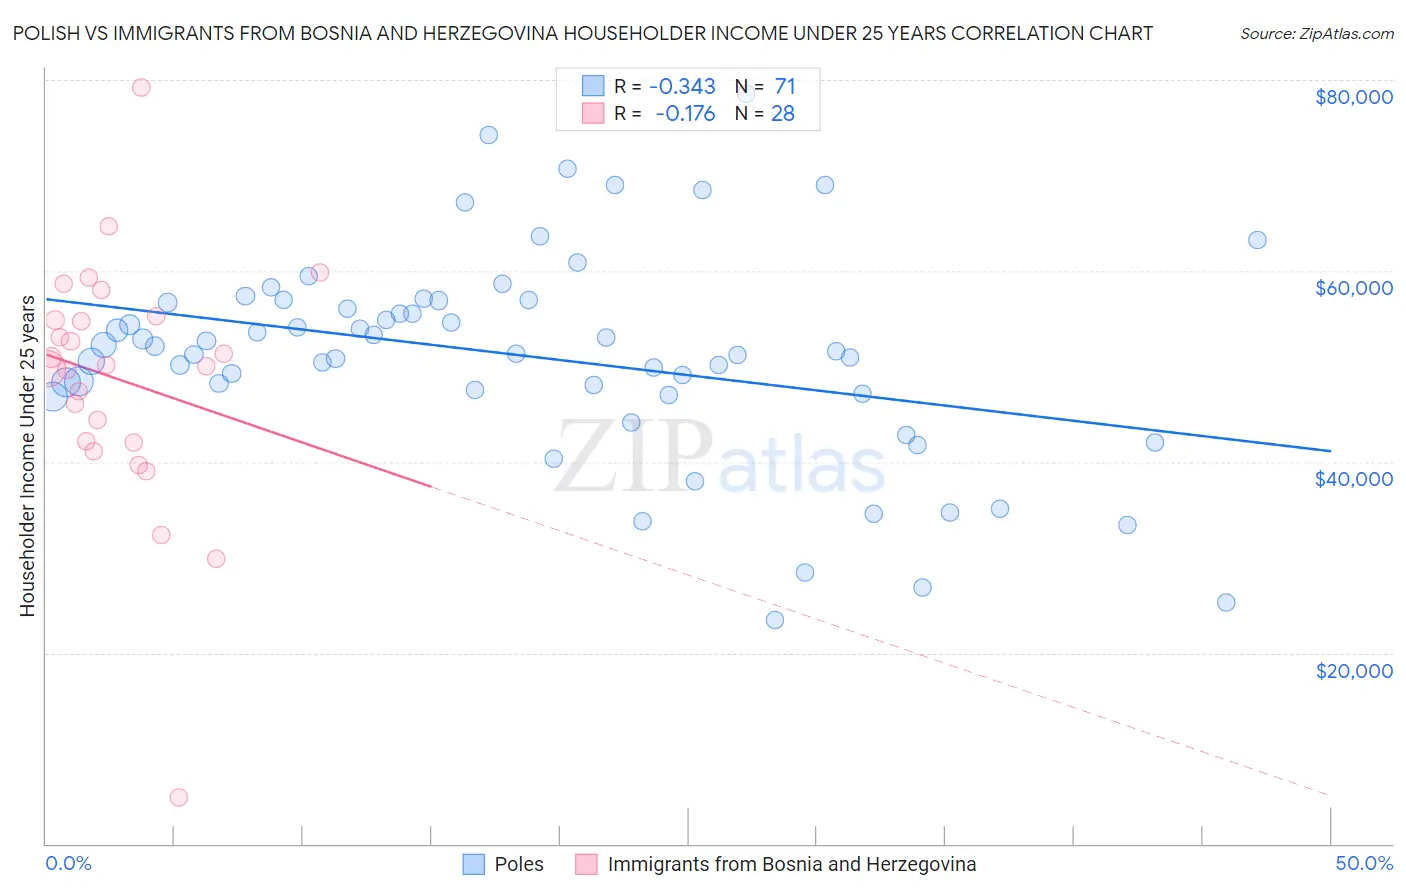 Polish vs Immigrants from Bosnia and Herzegovina Householder Income Under 25 years